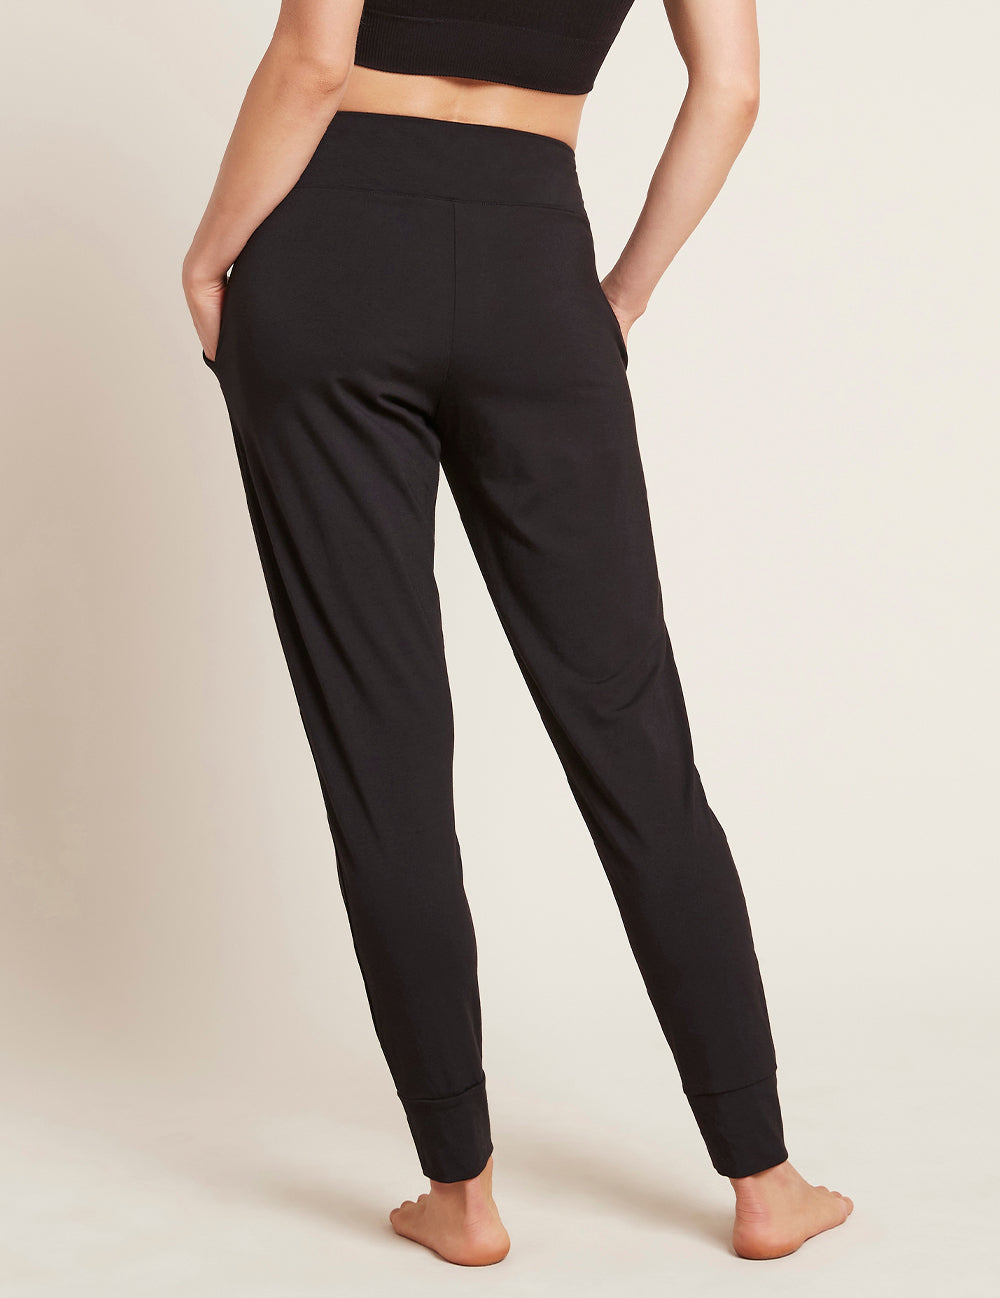 Downtime Lounge Pant, Boody Eco Wear US